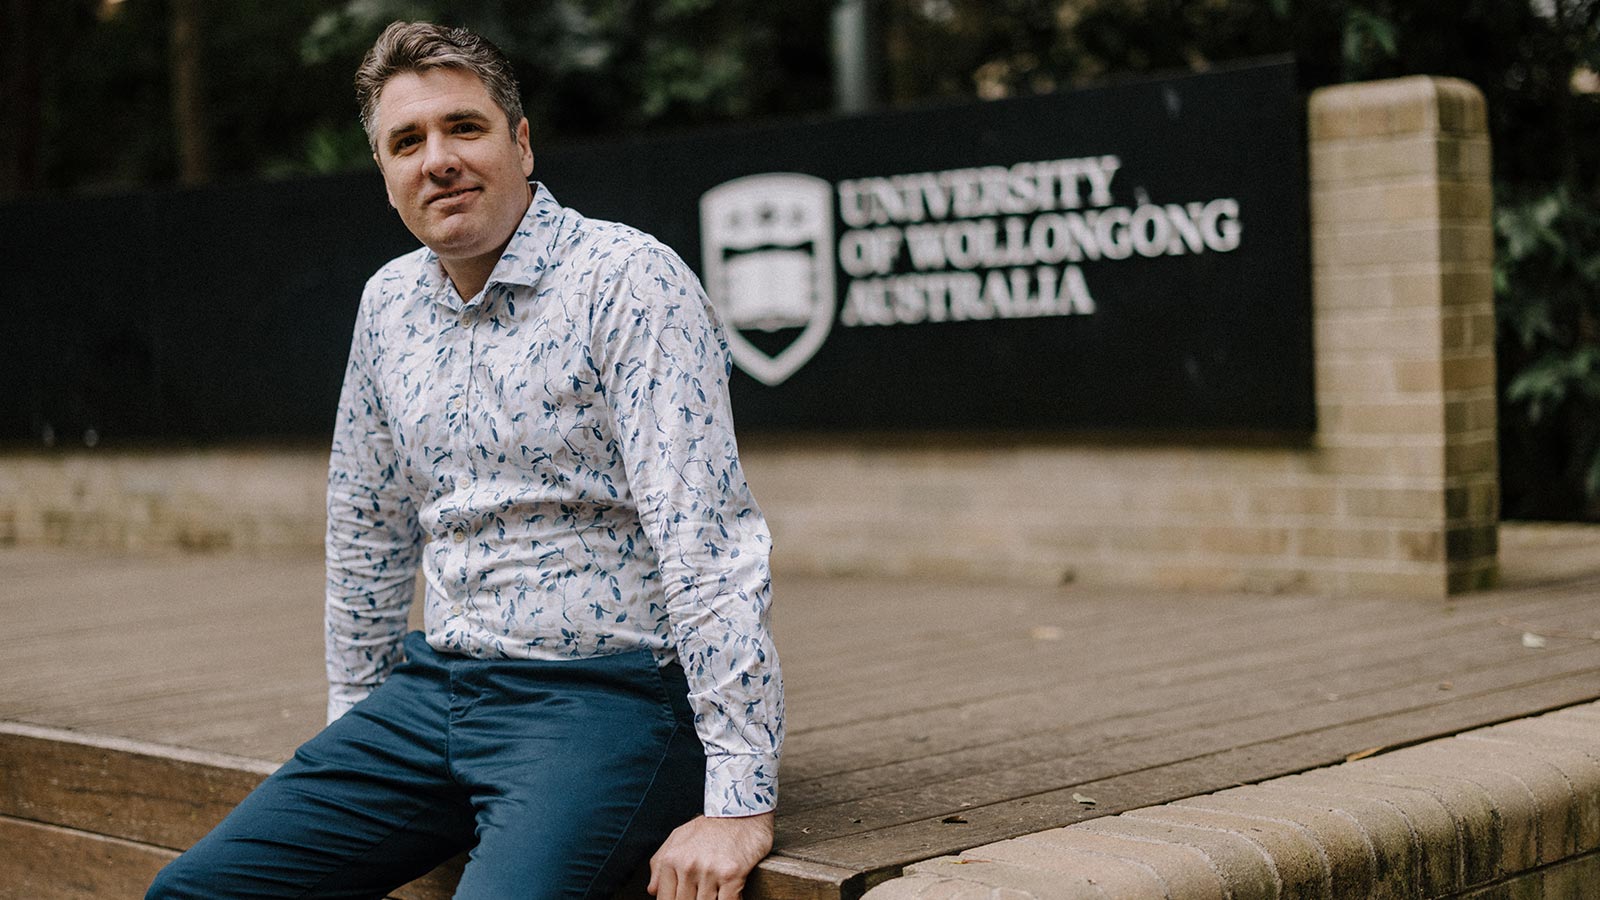 Professor Andrew Ainsworth has short, grey hair and is sitting on a brick stage in front of a black and white University of Wollongong sign. He is wearing a white floral dress shirt and blue dress pants.